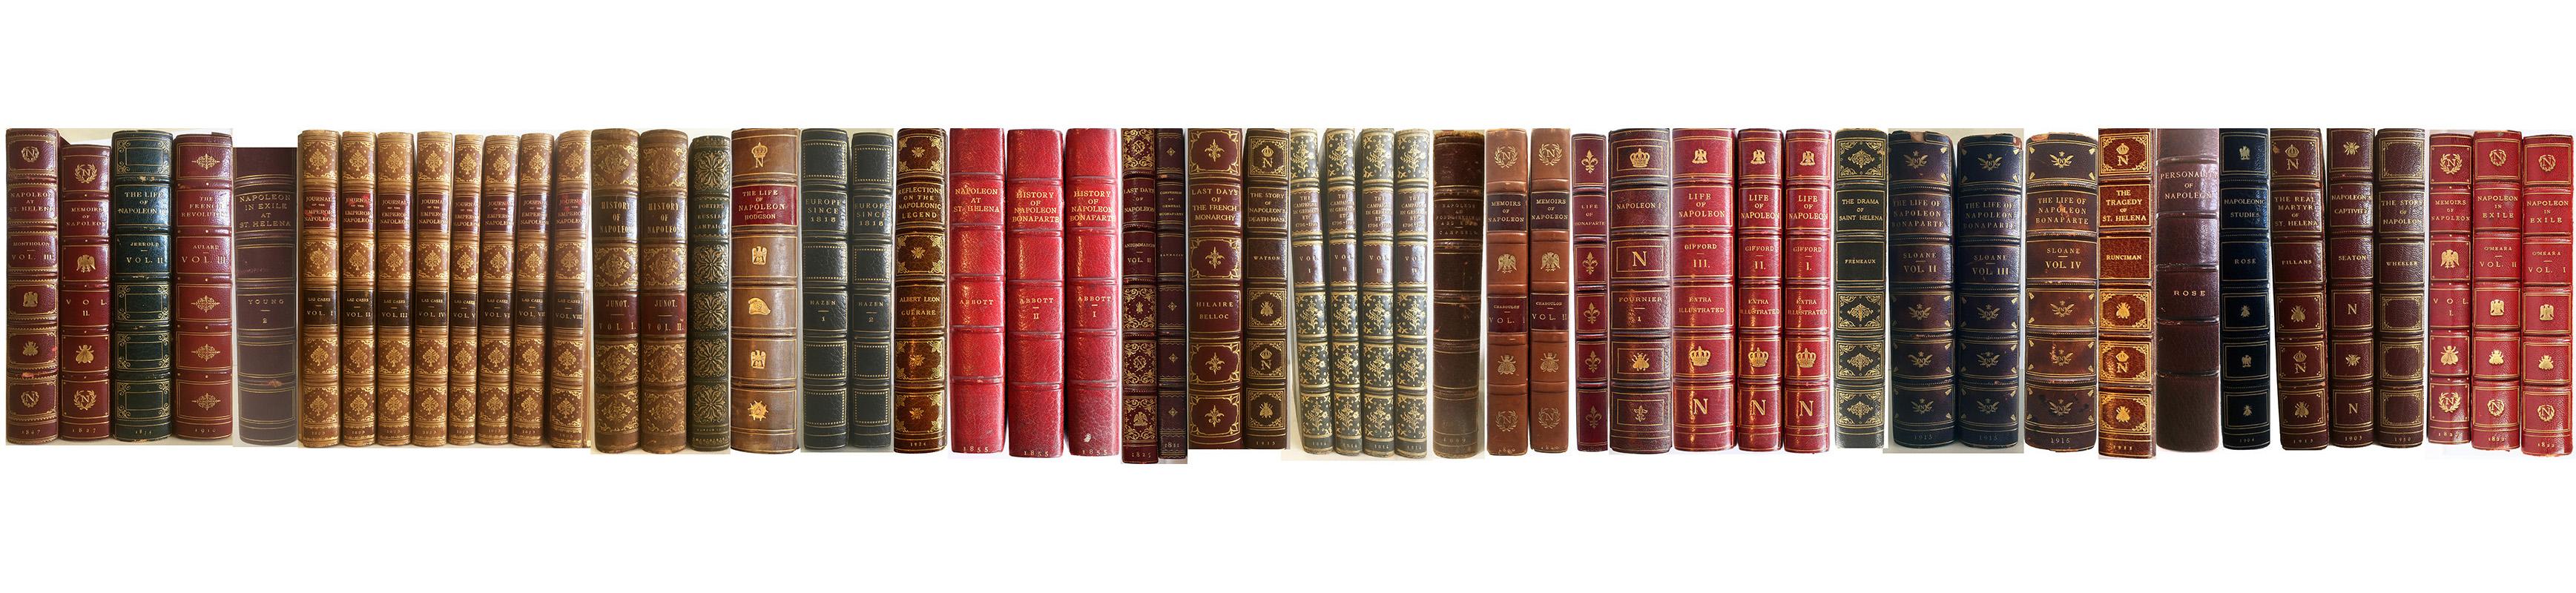  Napoleon Bonaparte: Assorted Book Collection From 1811 - 1924 - Art by Unknown